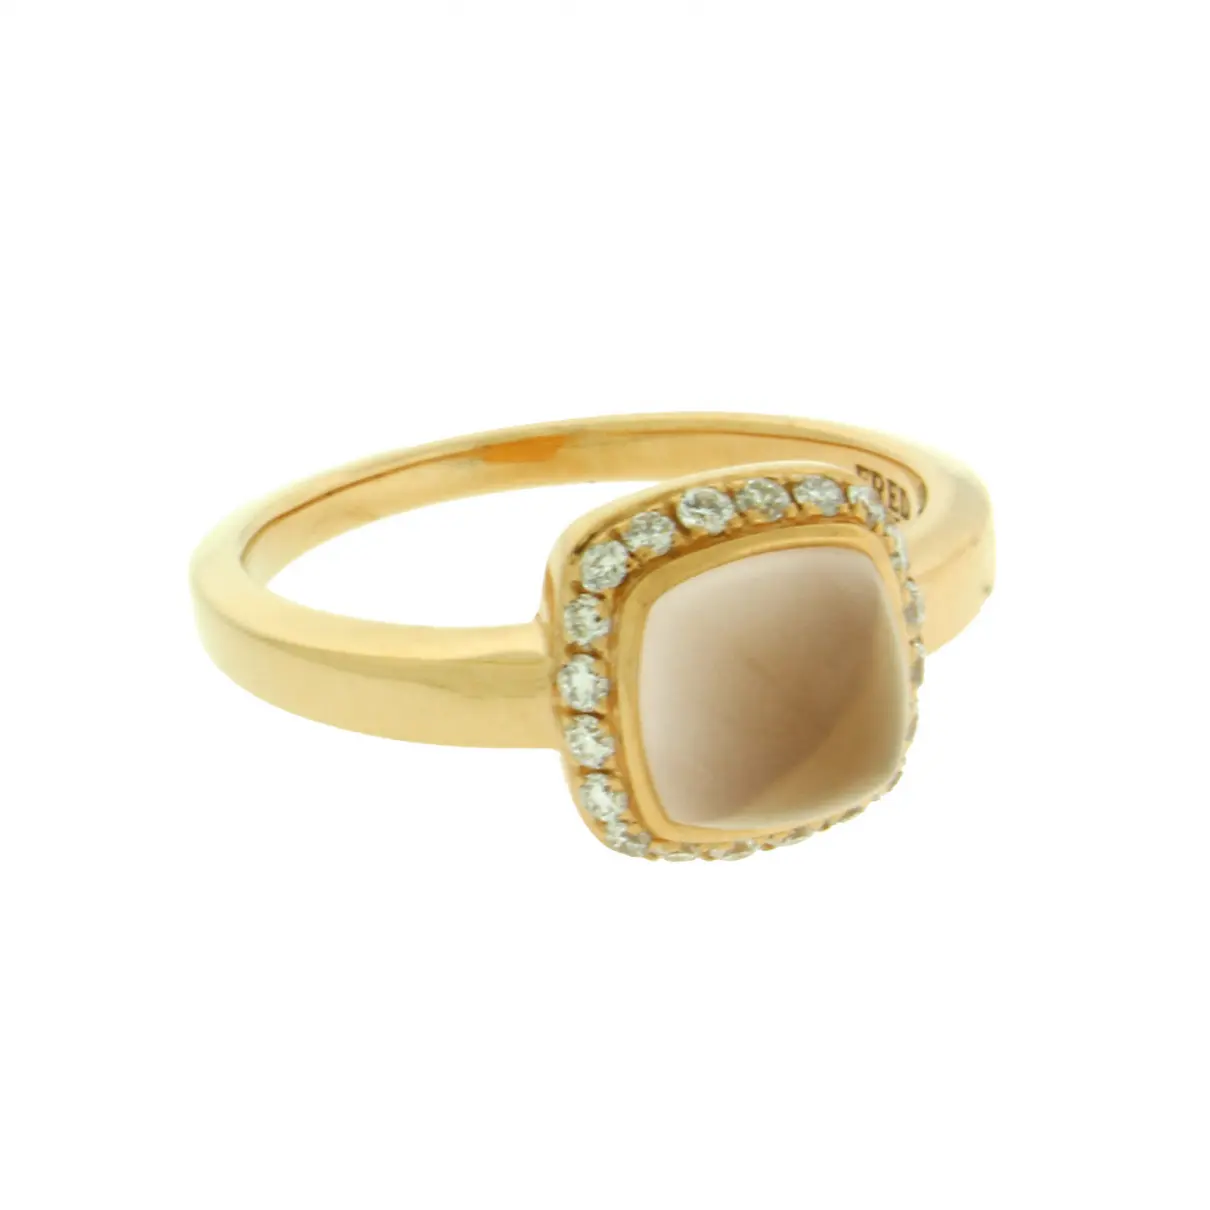 Buy Fred Pink gold ring online